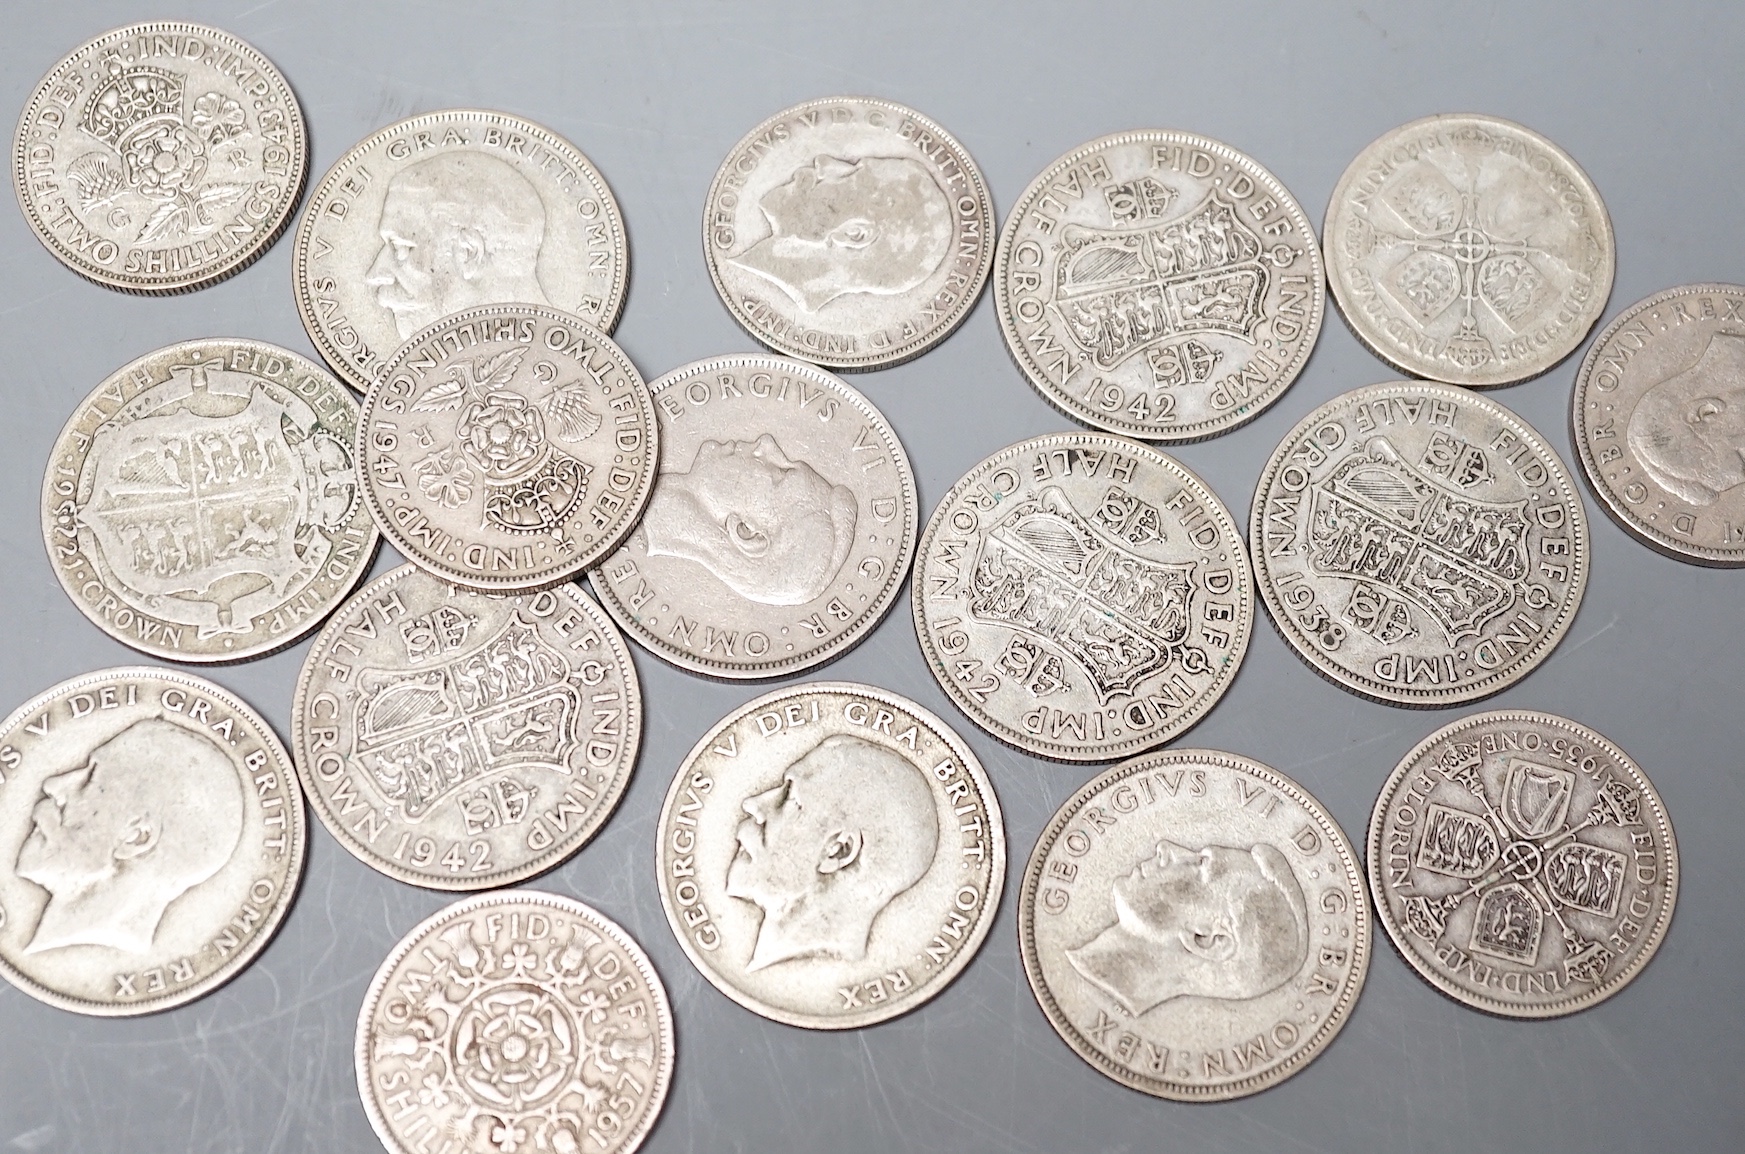 A 1976 French 50 Francs, and a collection of George V to QEII UK florins, shillings and threepence coins